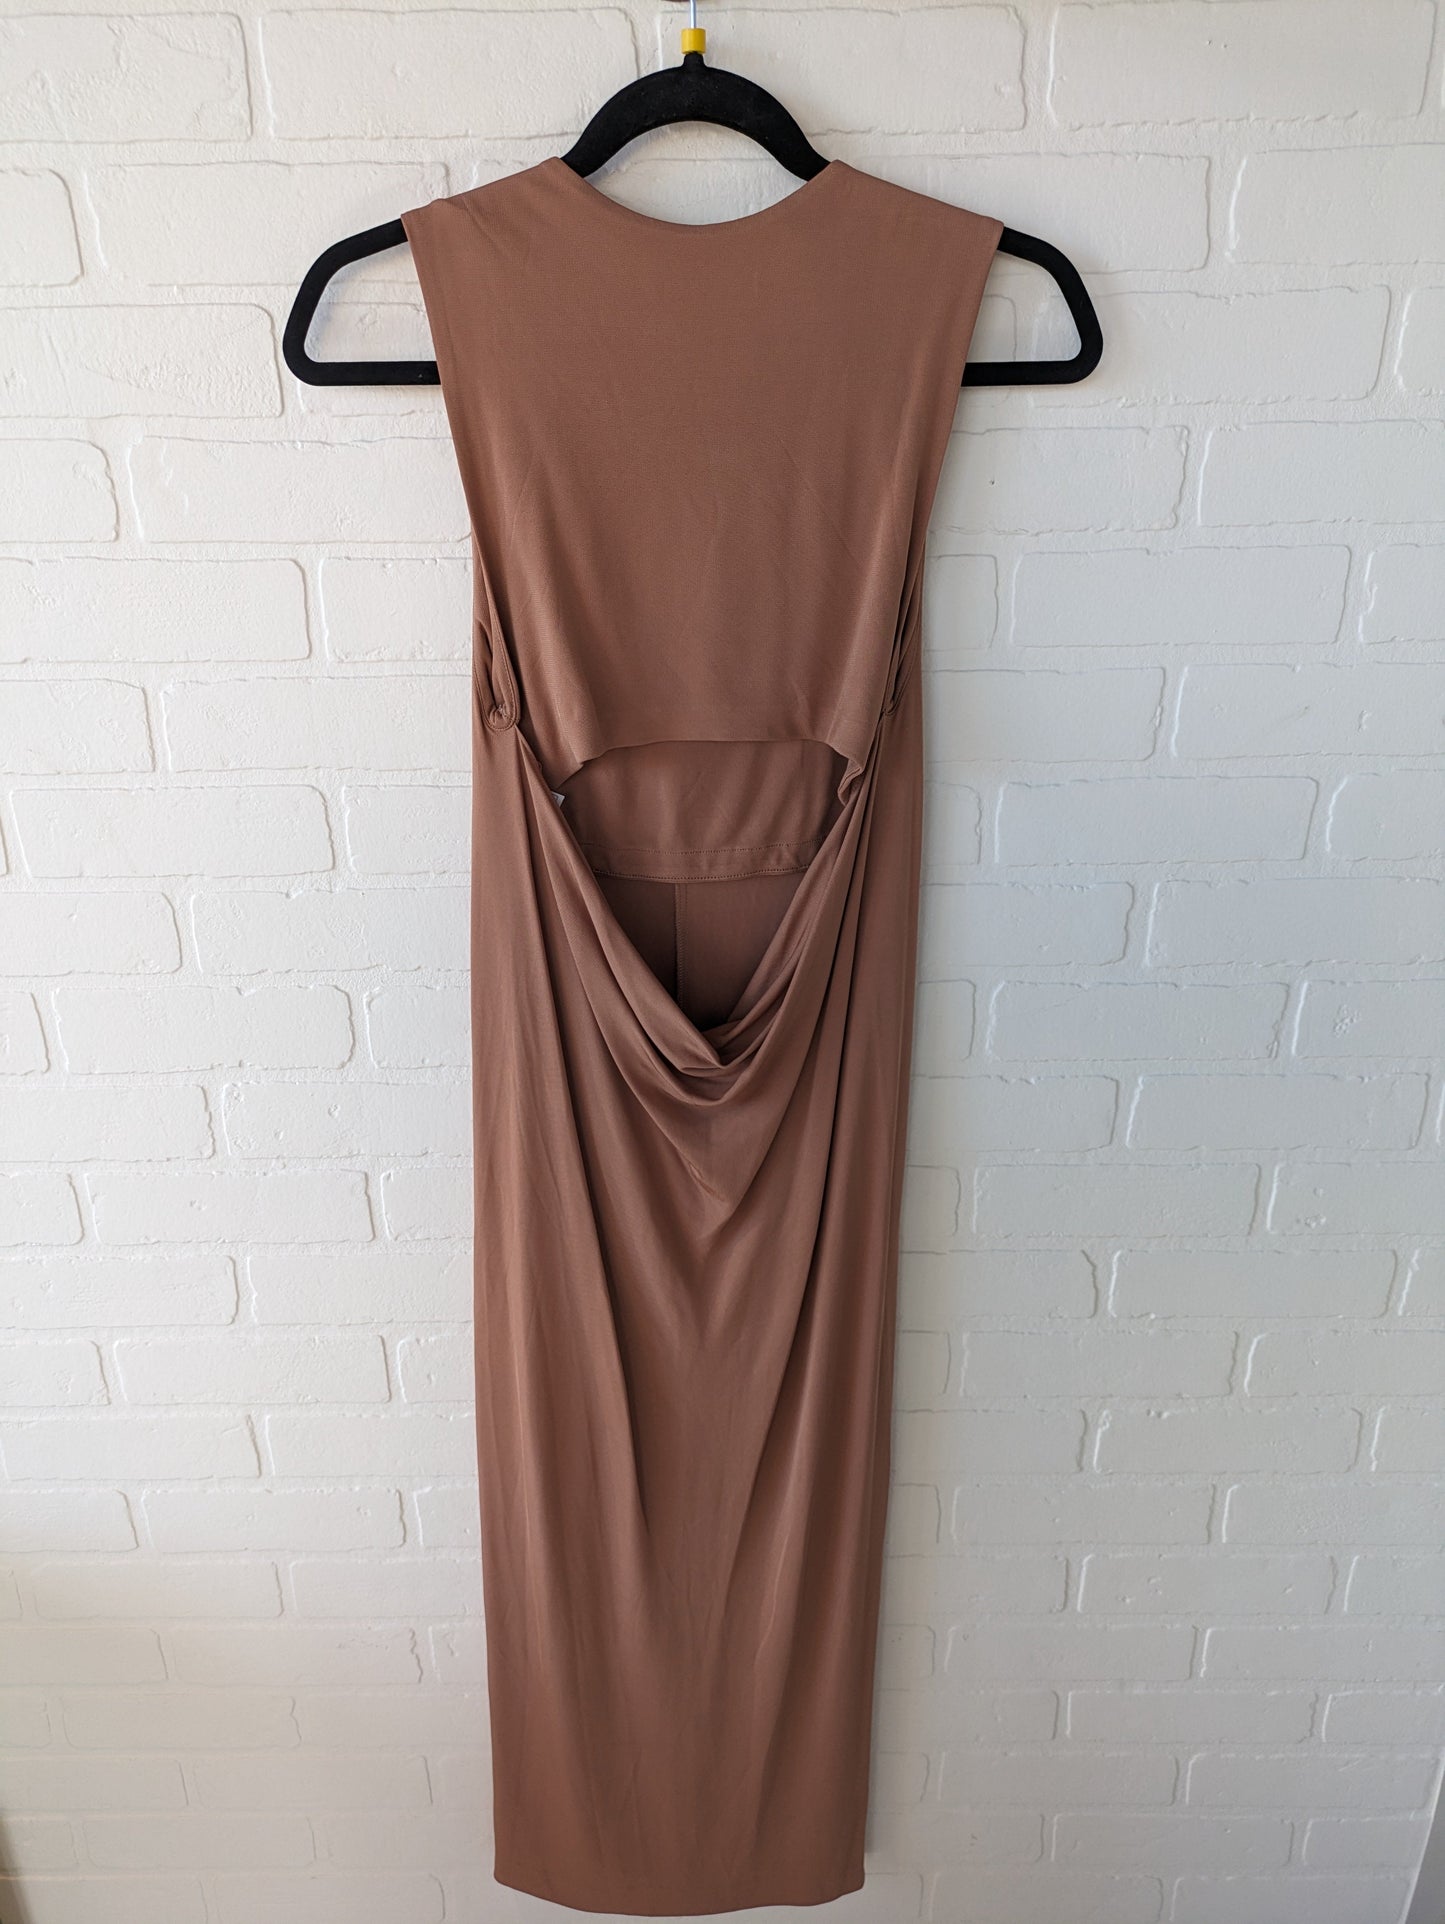 Dress Party Long By Alexander Wang  Size: M